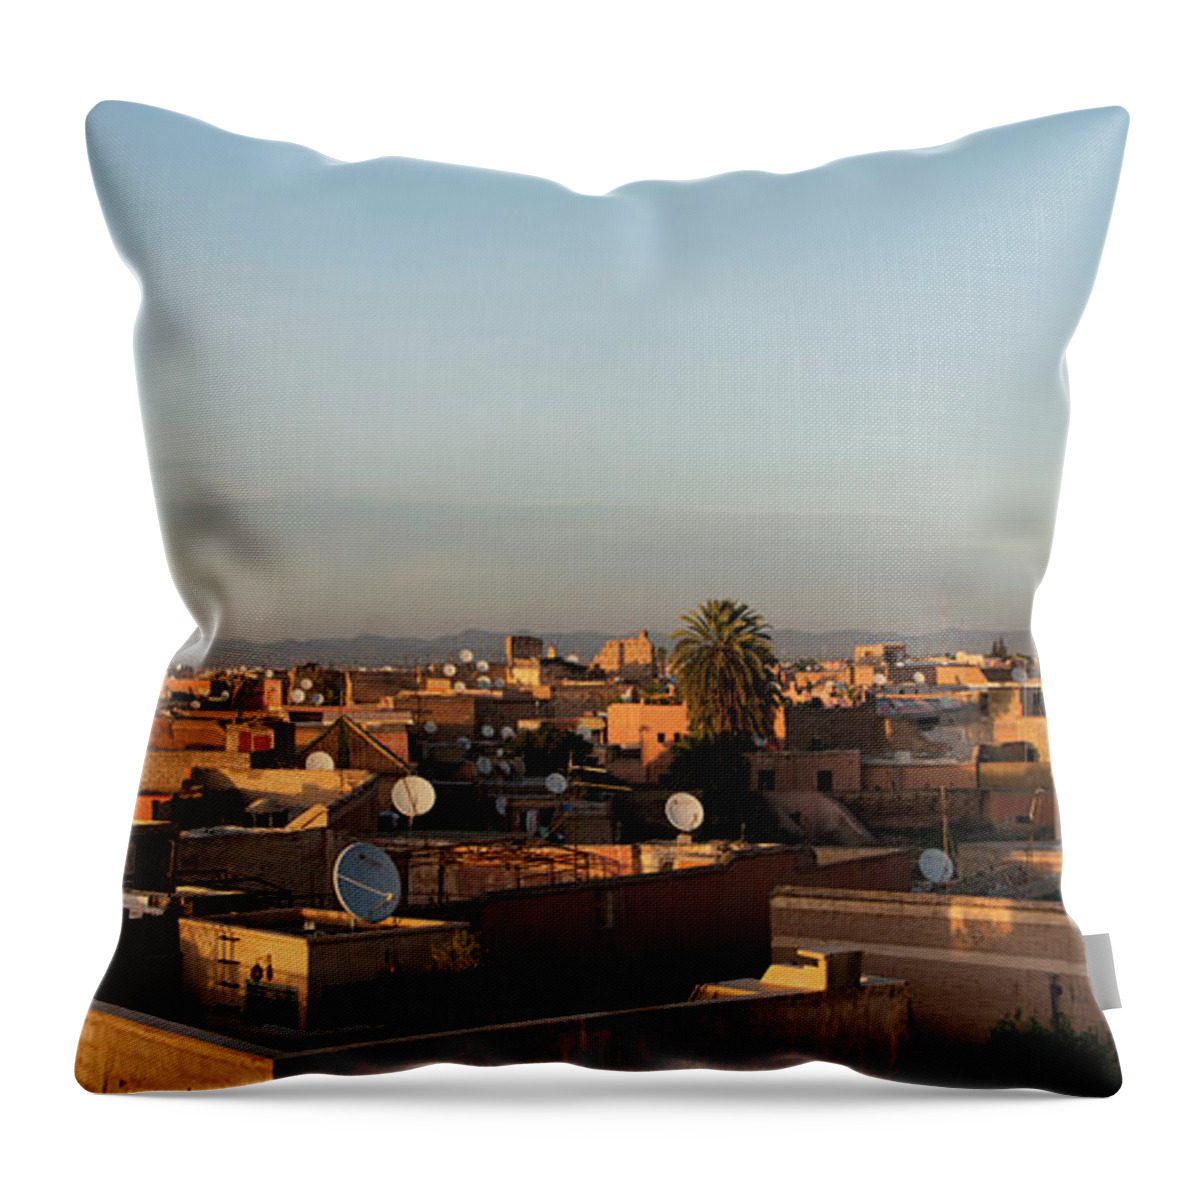 Dawn Throw Pillow featuring the photograph A City With Satellite Dishes On The by Keith Levit / Design Pics